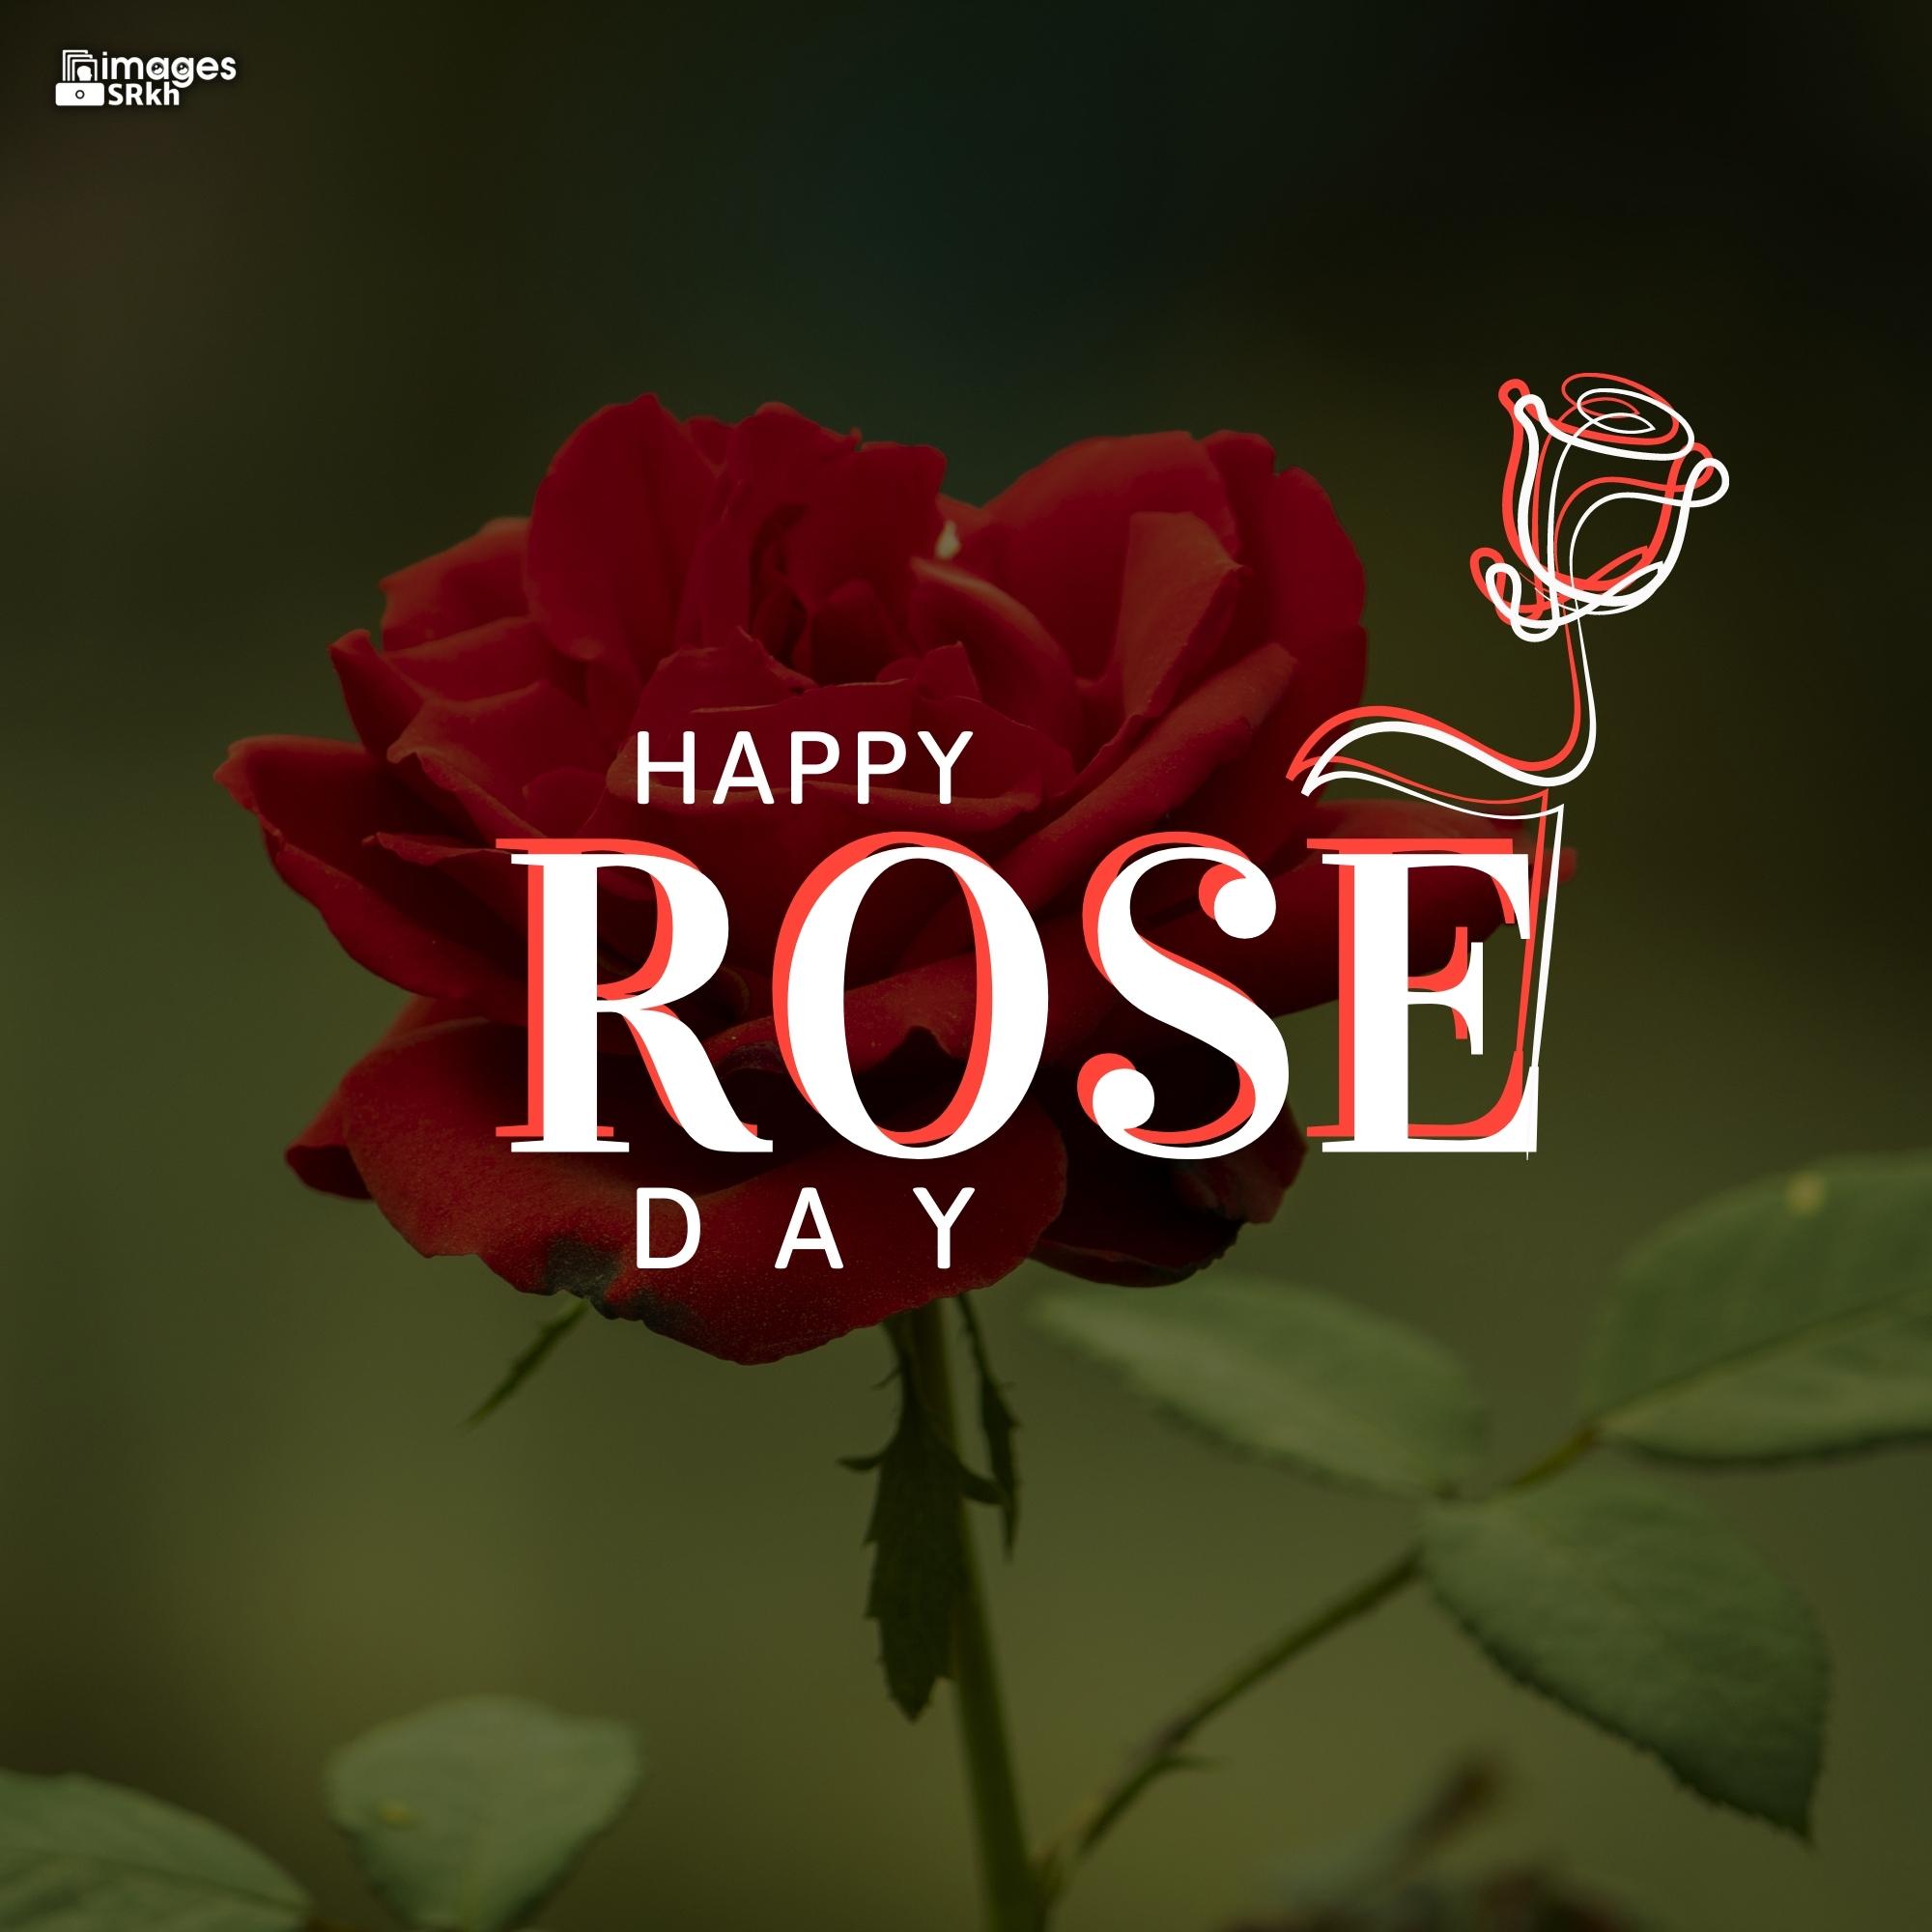 Happy Rose Day Image Hd Download (103)